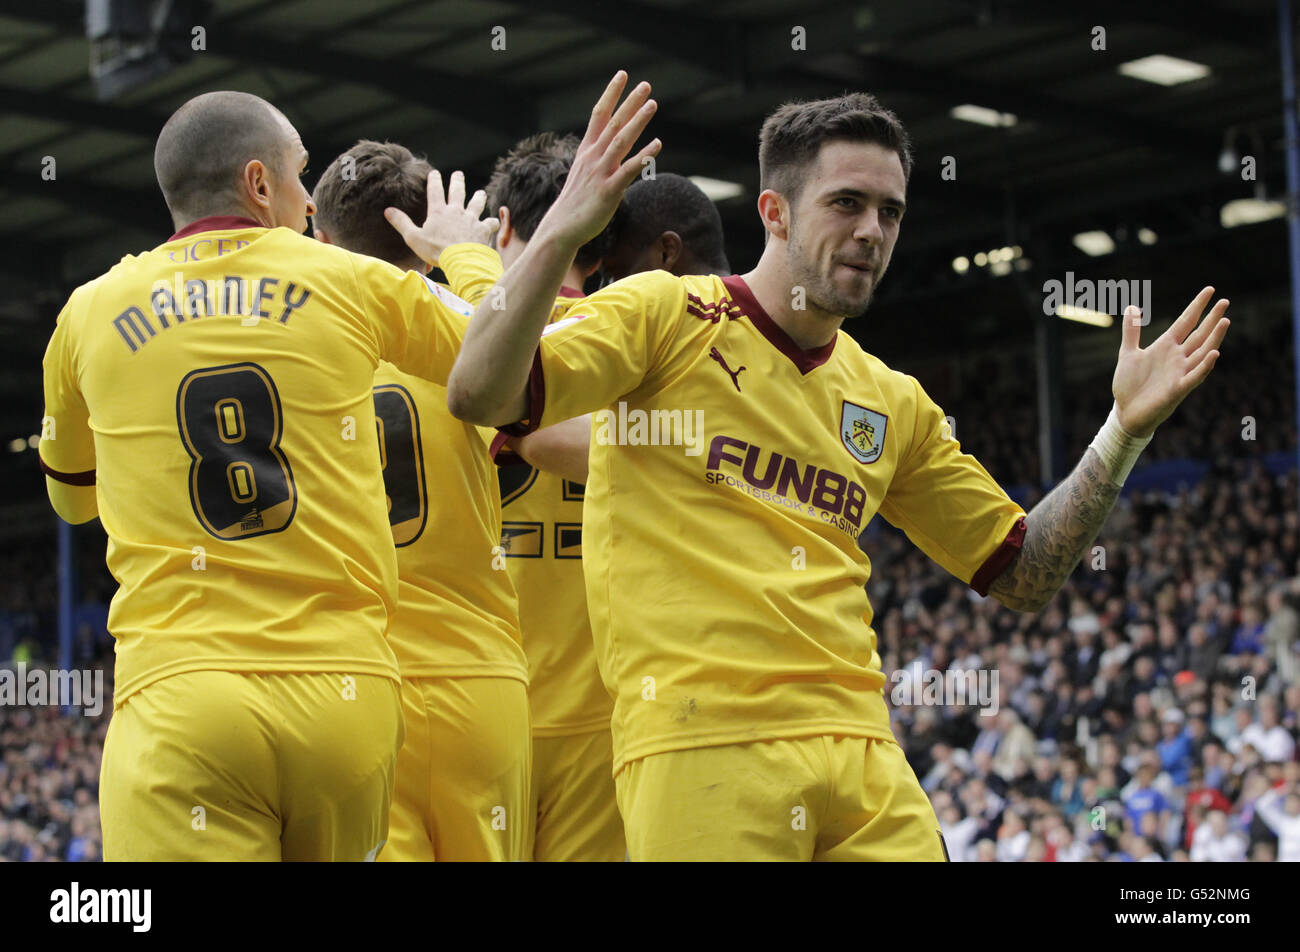 Burnley's Danny Ings (right) celebrates team mate Charlie Austin's goal during the npower Football League Championship match at Fratton Park, Portsmouth. Stock Photo